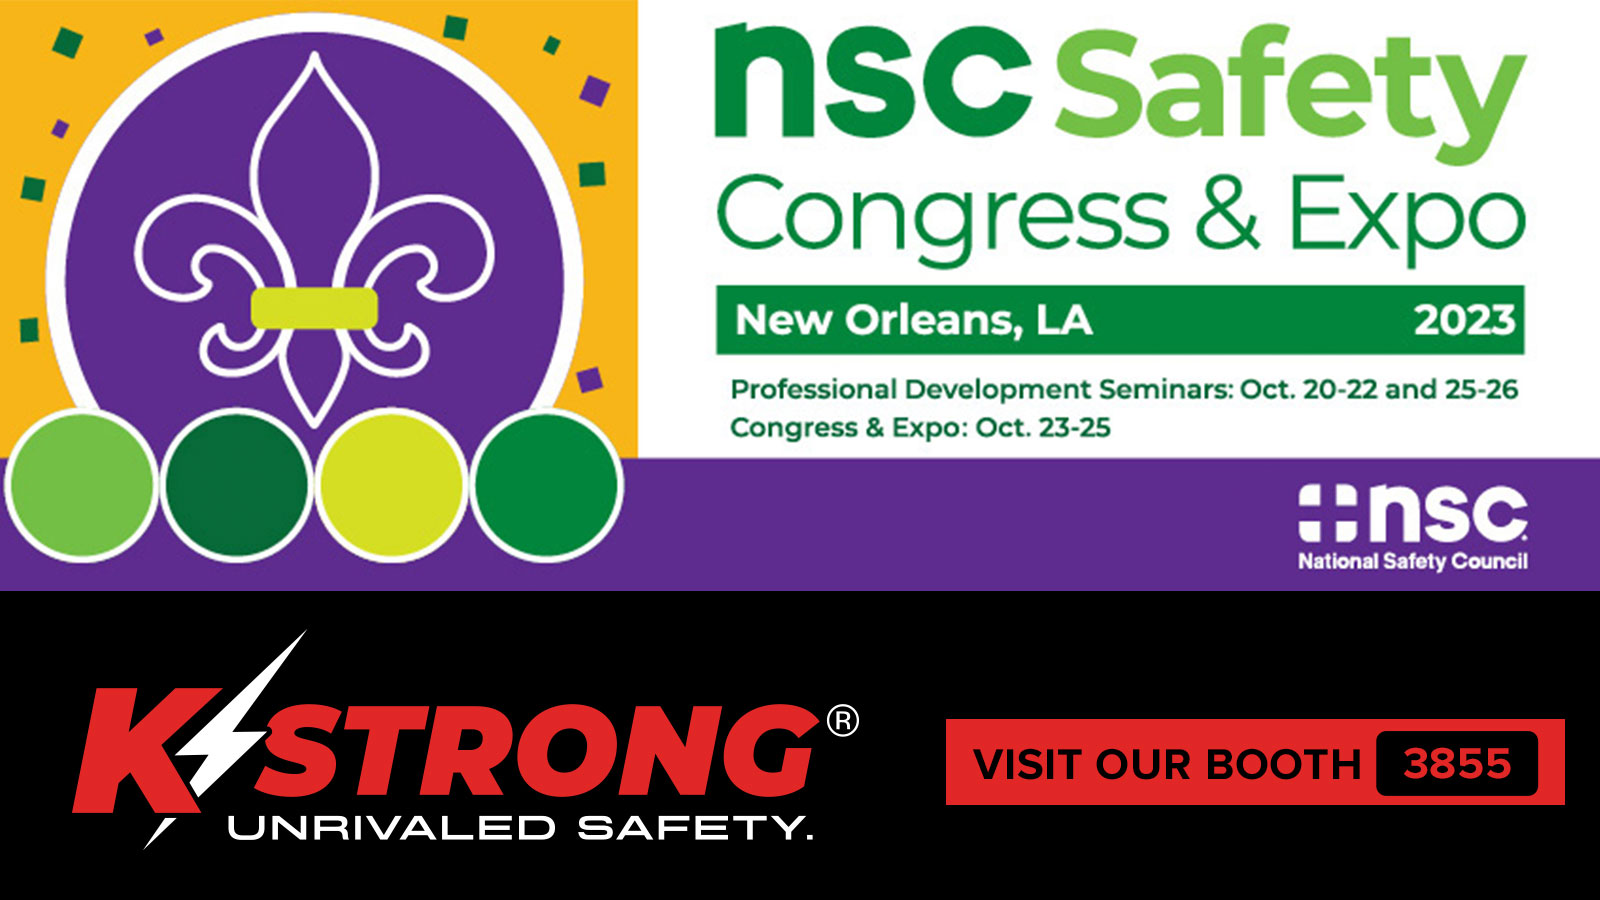 2023 NSC Safety Congress & Expo // October 23-25 // New Orleans, LA